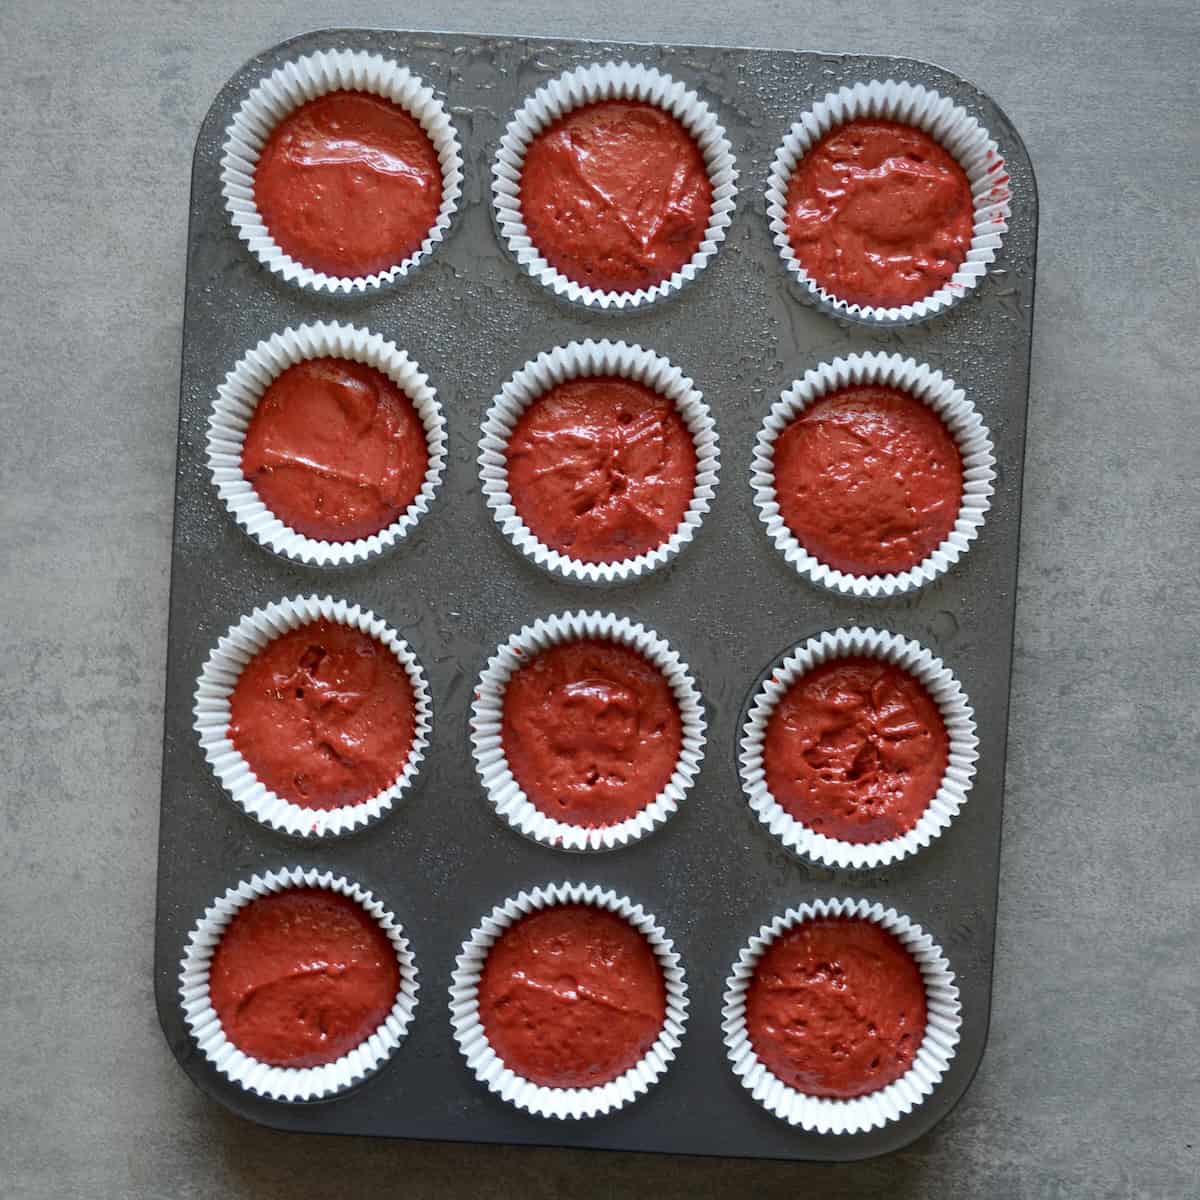 Red velvet cupcakes scooped in a pan